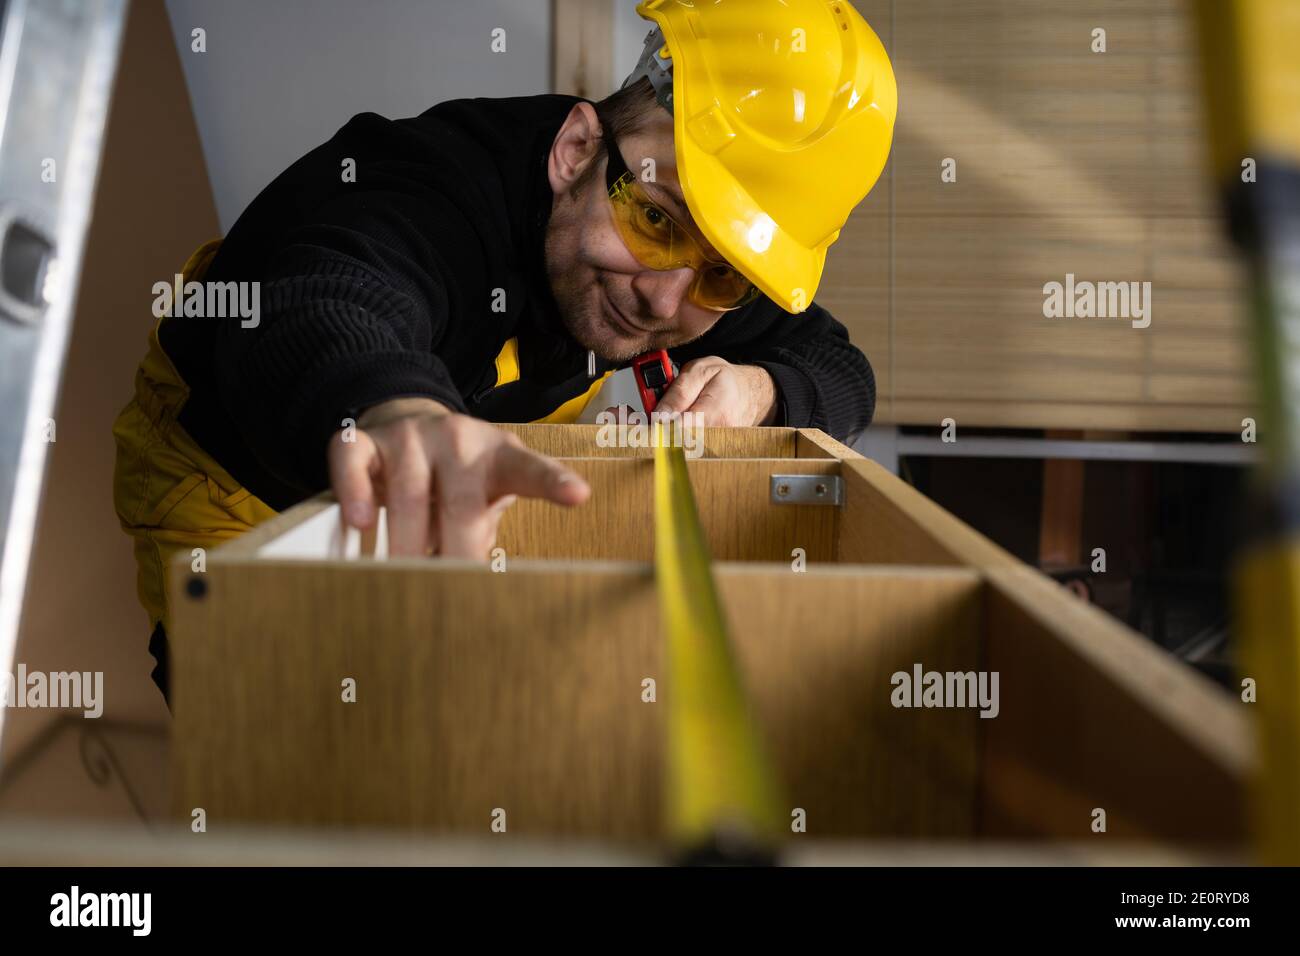 The construction worker measures the top of the cabinet to check if it is made correctly with the designed dimensions. Wearing personal protective equipment. Stock Photo